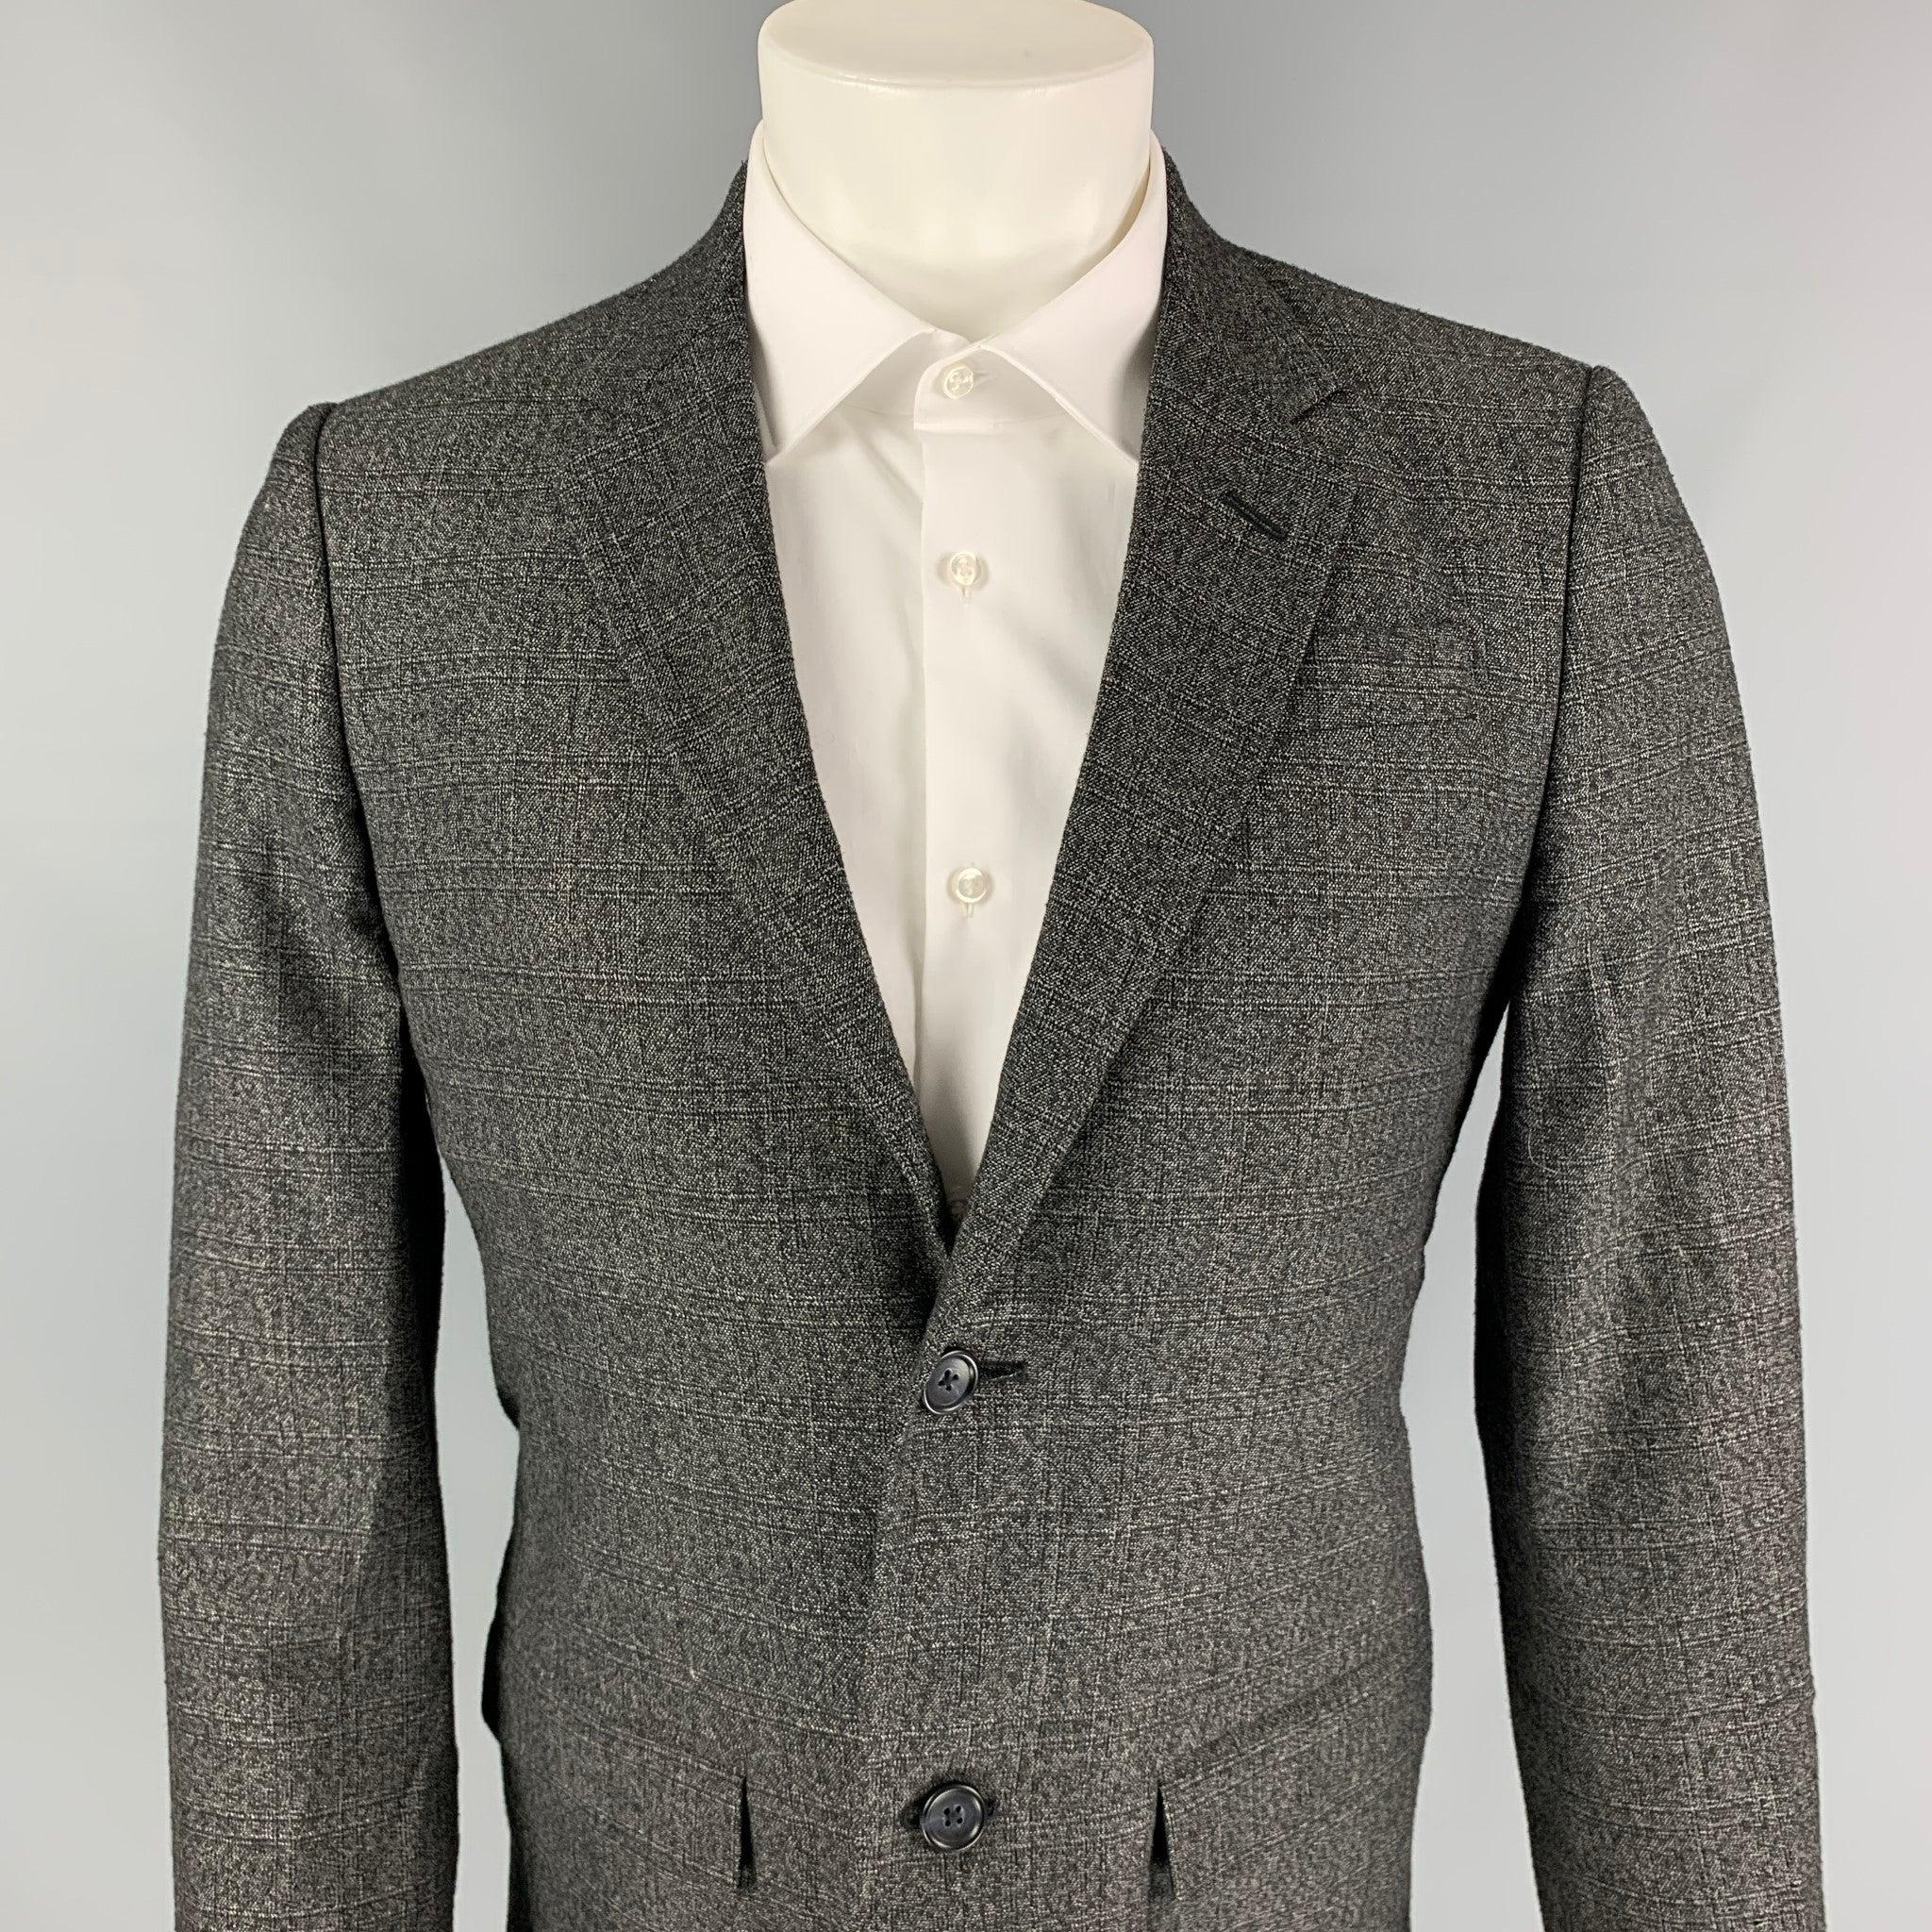 MARC by MARC JACOBS sport coat comes in a charcoal heather wool blend with a full liner featuring a notch lapel, flap pockets, and a double button closure.
Very Good
Pre-Owned Condition. 

Marked:   M 

Measurements: 
 
Shoulder: 17 inches Chest: 38